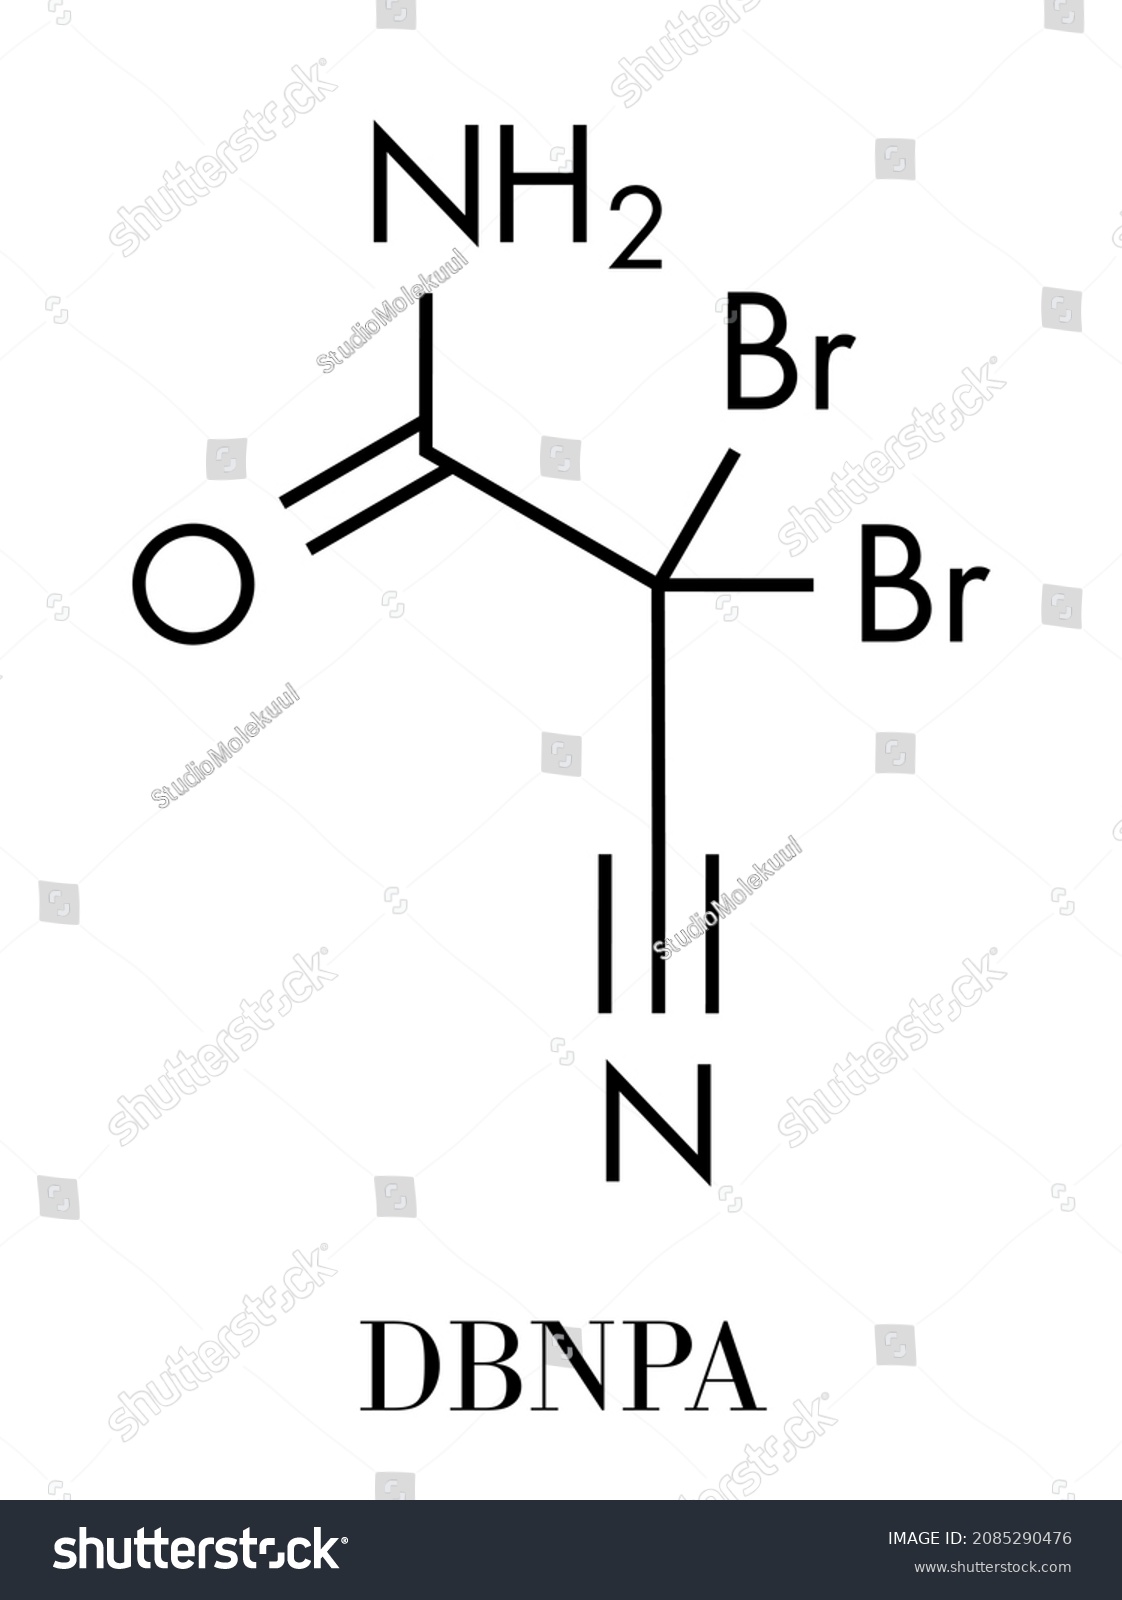 SVG of DBNPA (2,2-dibromo-3-nitrilopropionamide) biocide, chemical structure. Quick-kill biocide that rapidly breaks down in water. Skeletal formula. svg